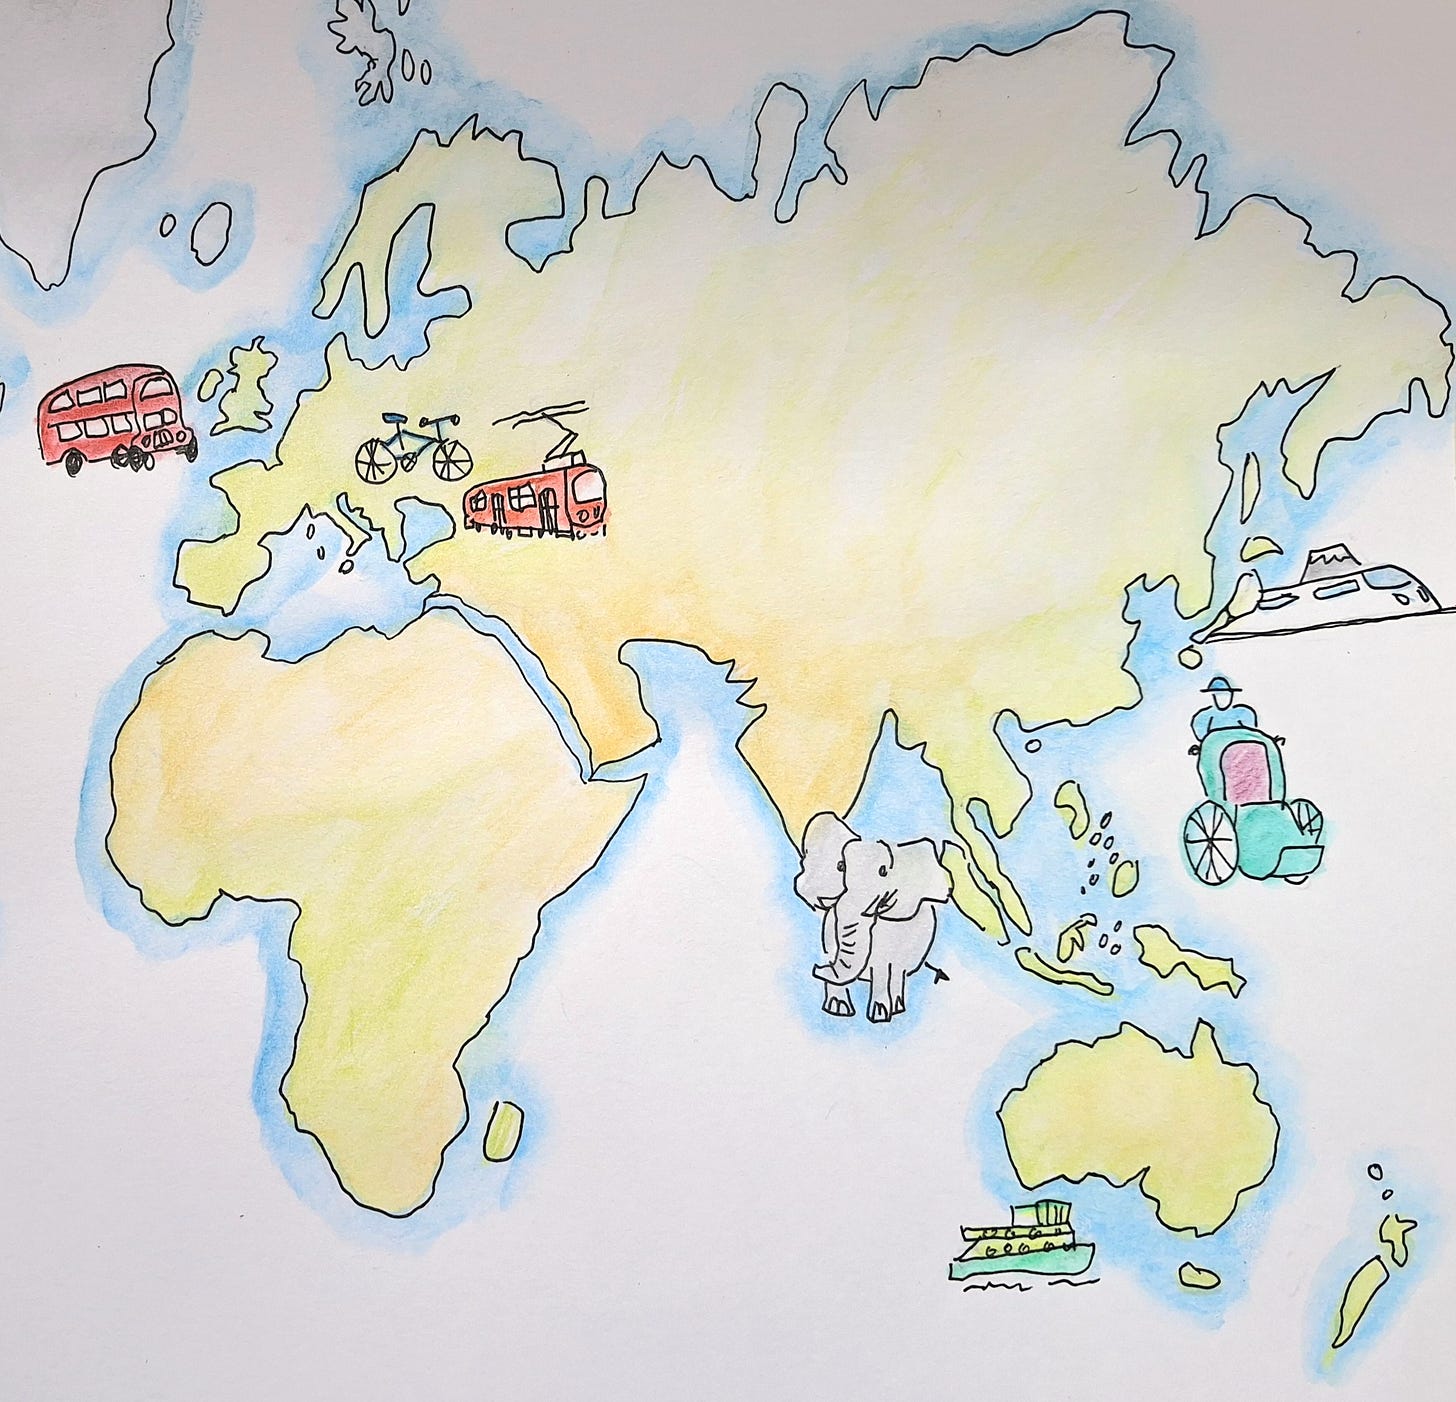 Cartoon map of Europe and Asia in pen and watercolour pencil.  Illustrated with icons of a double-decker bus, bicycle, tram, elephant, ferry, cyclo and shinkansen train.